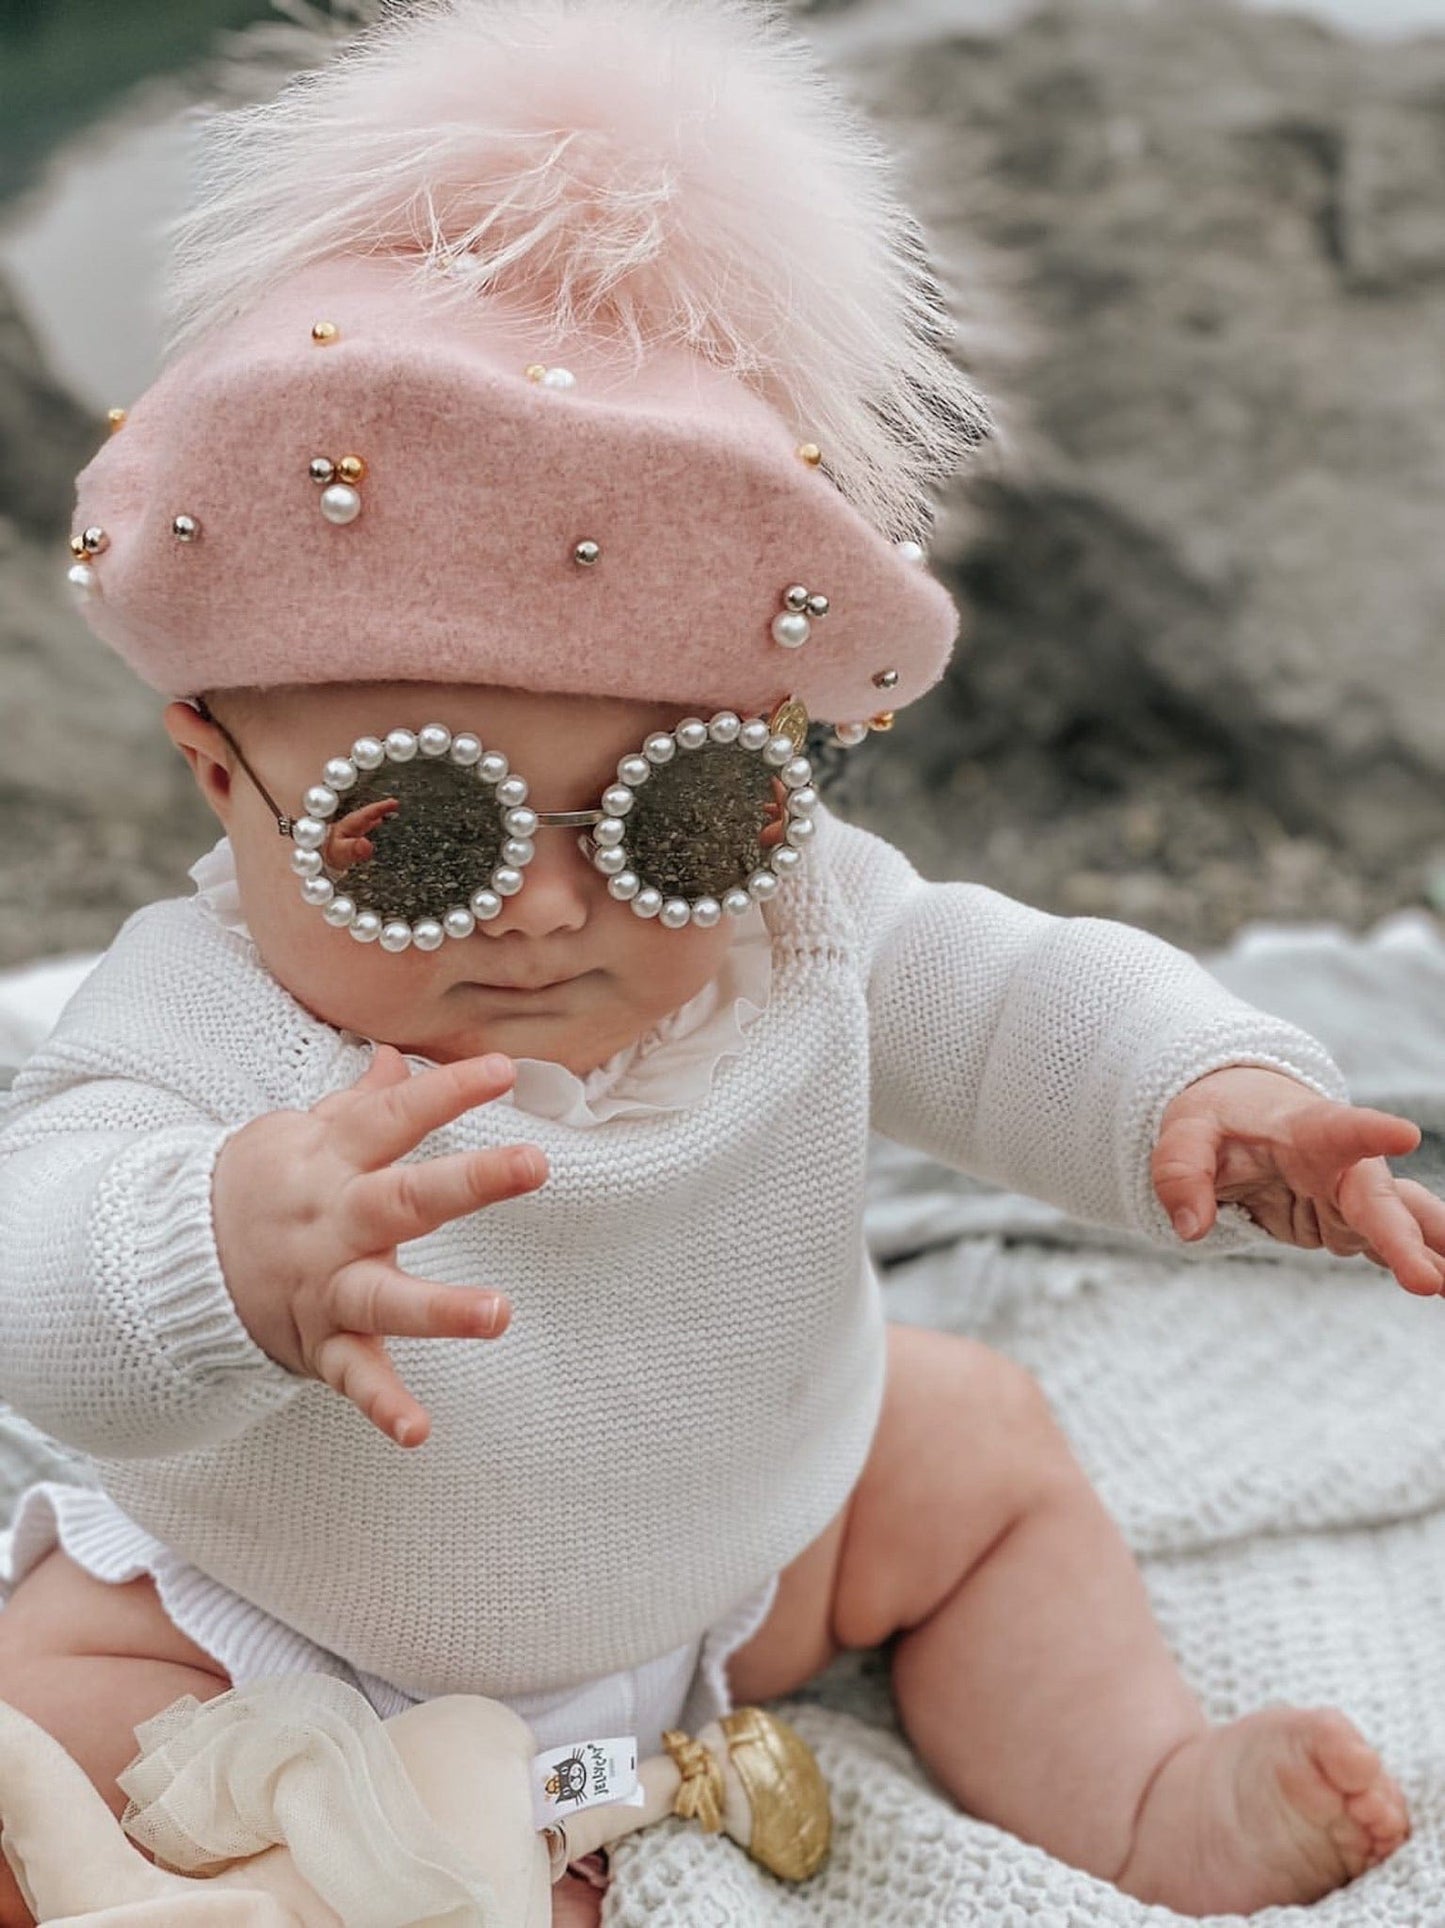 Baby Wool Berets with Pearls - Petite Maison Kids